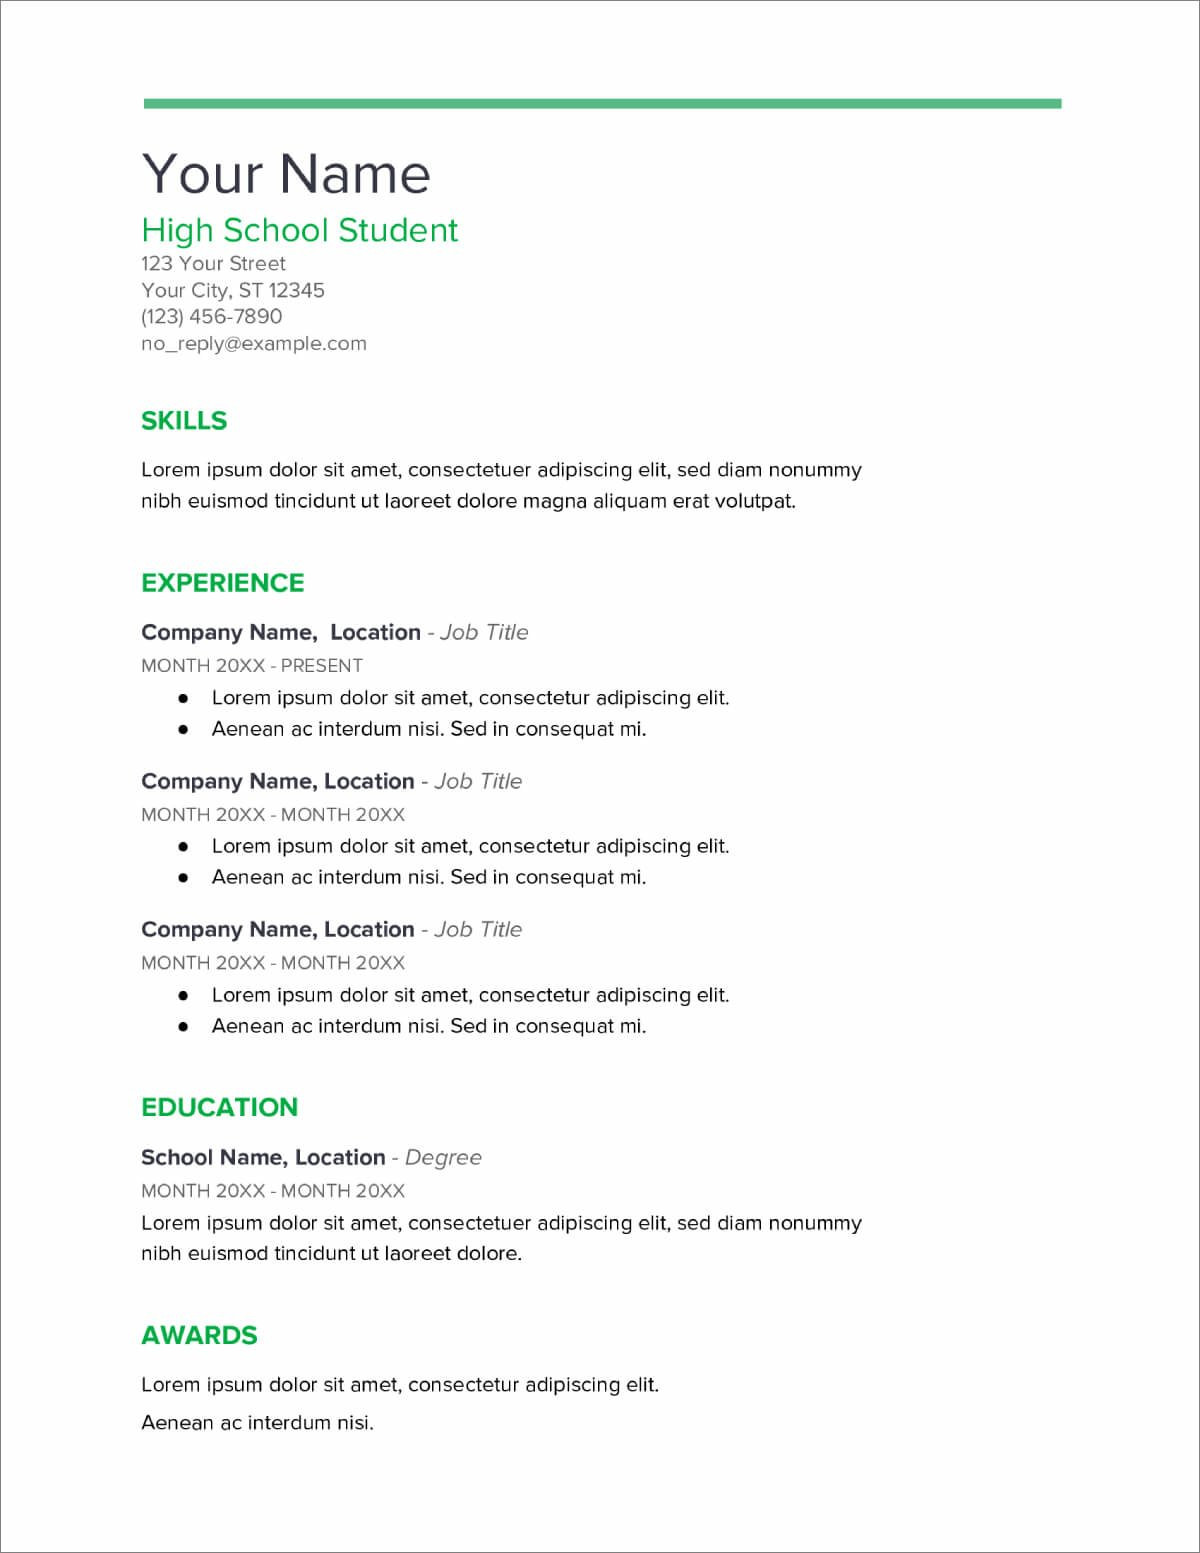 Resume Samples for Highschool Students with Work Experience 20lancarrezekiq High School Resume Templates [download now]